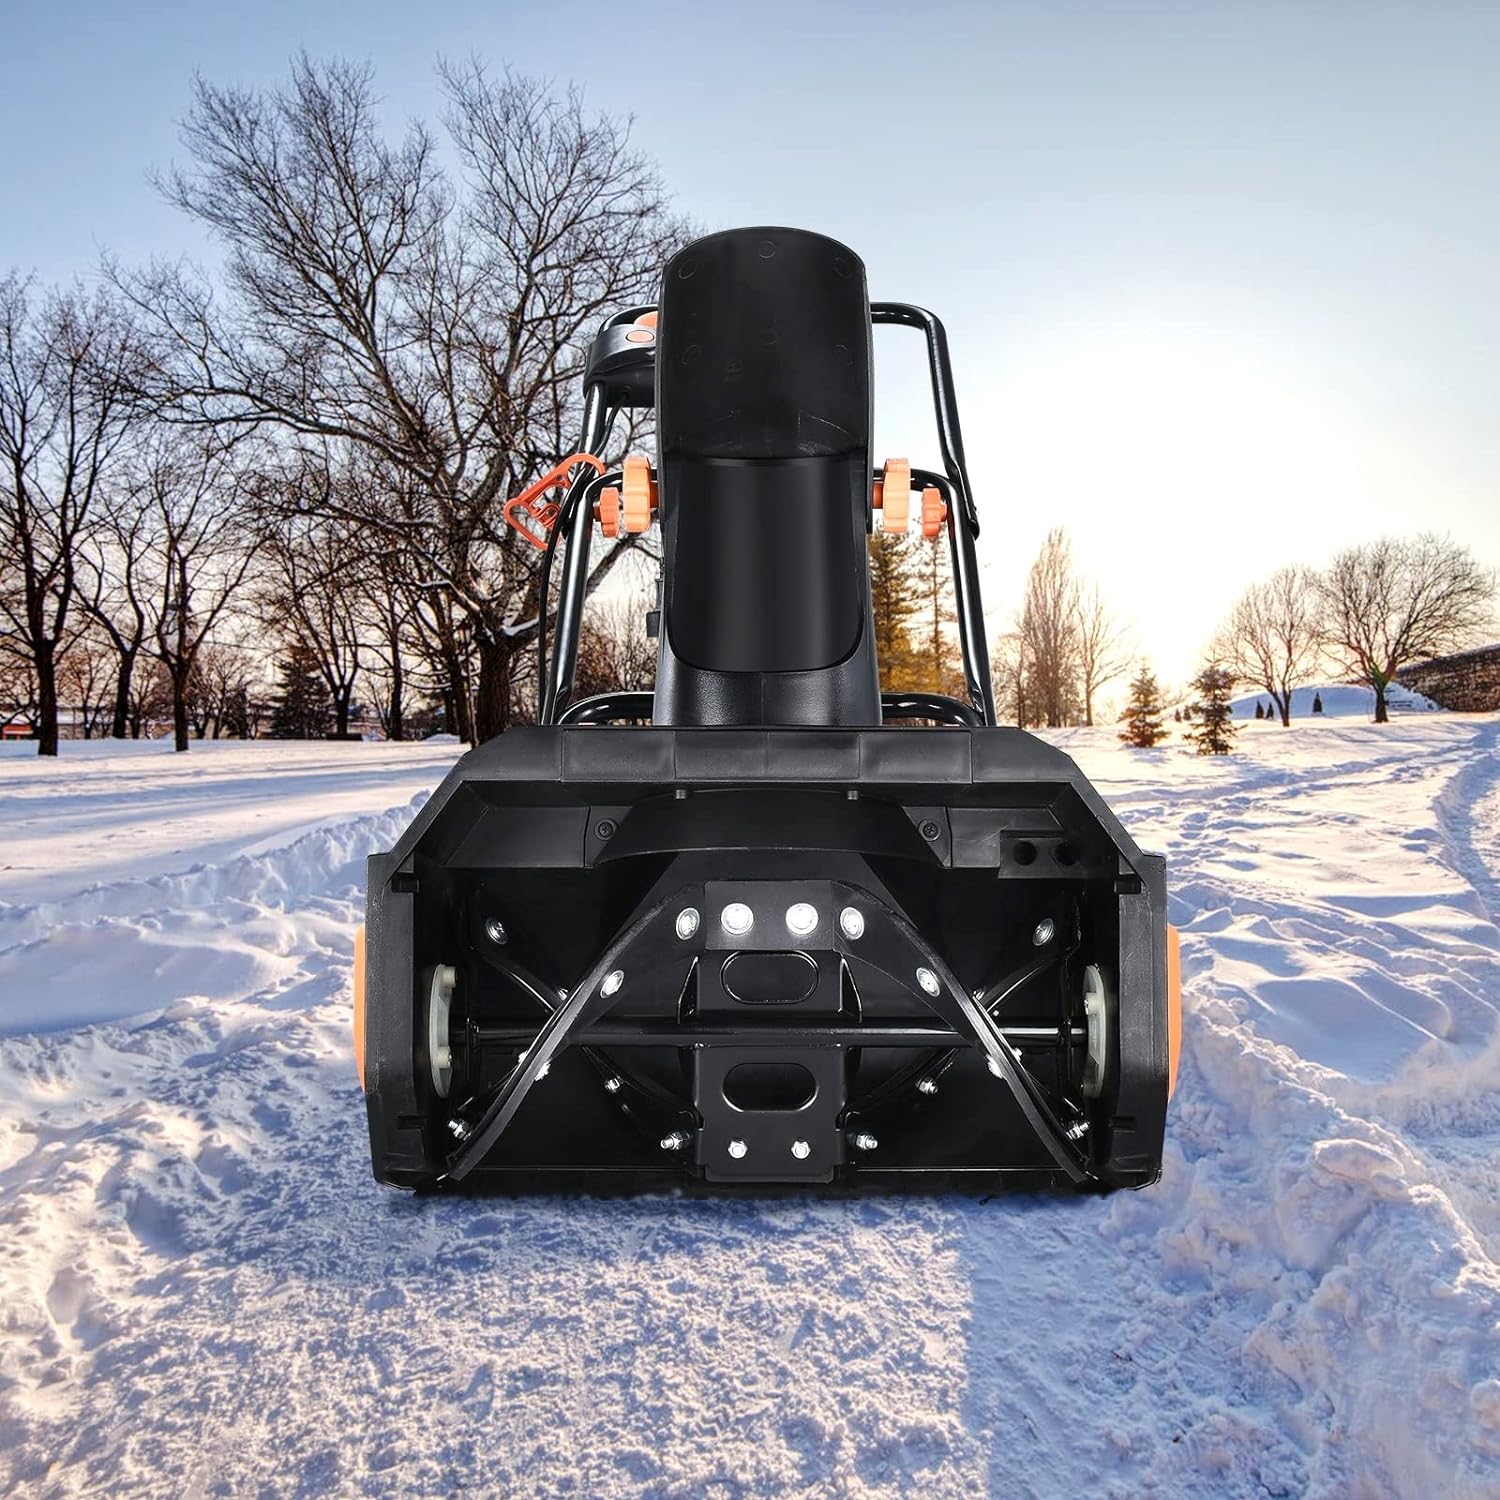 Kapoo 18 Inch Electric Snow Blower Review